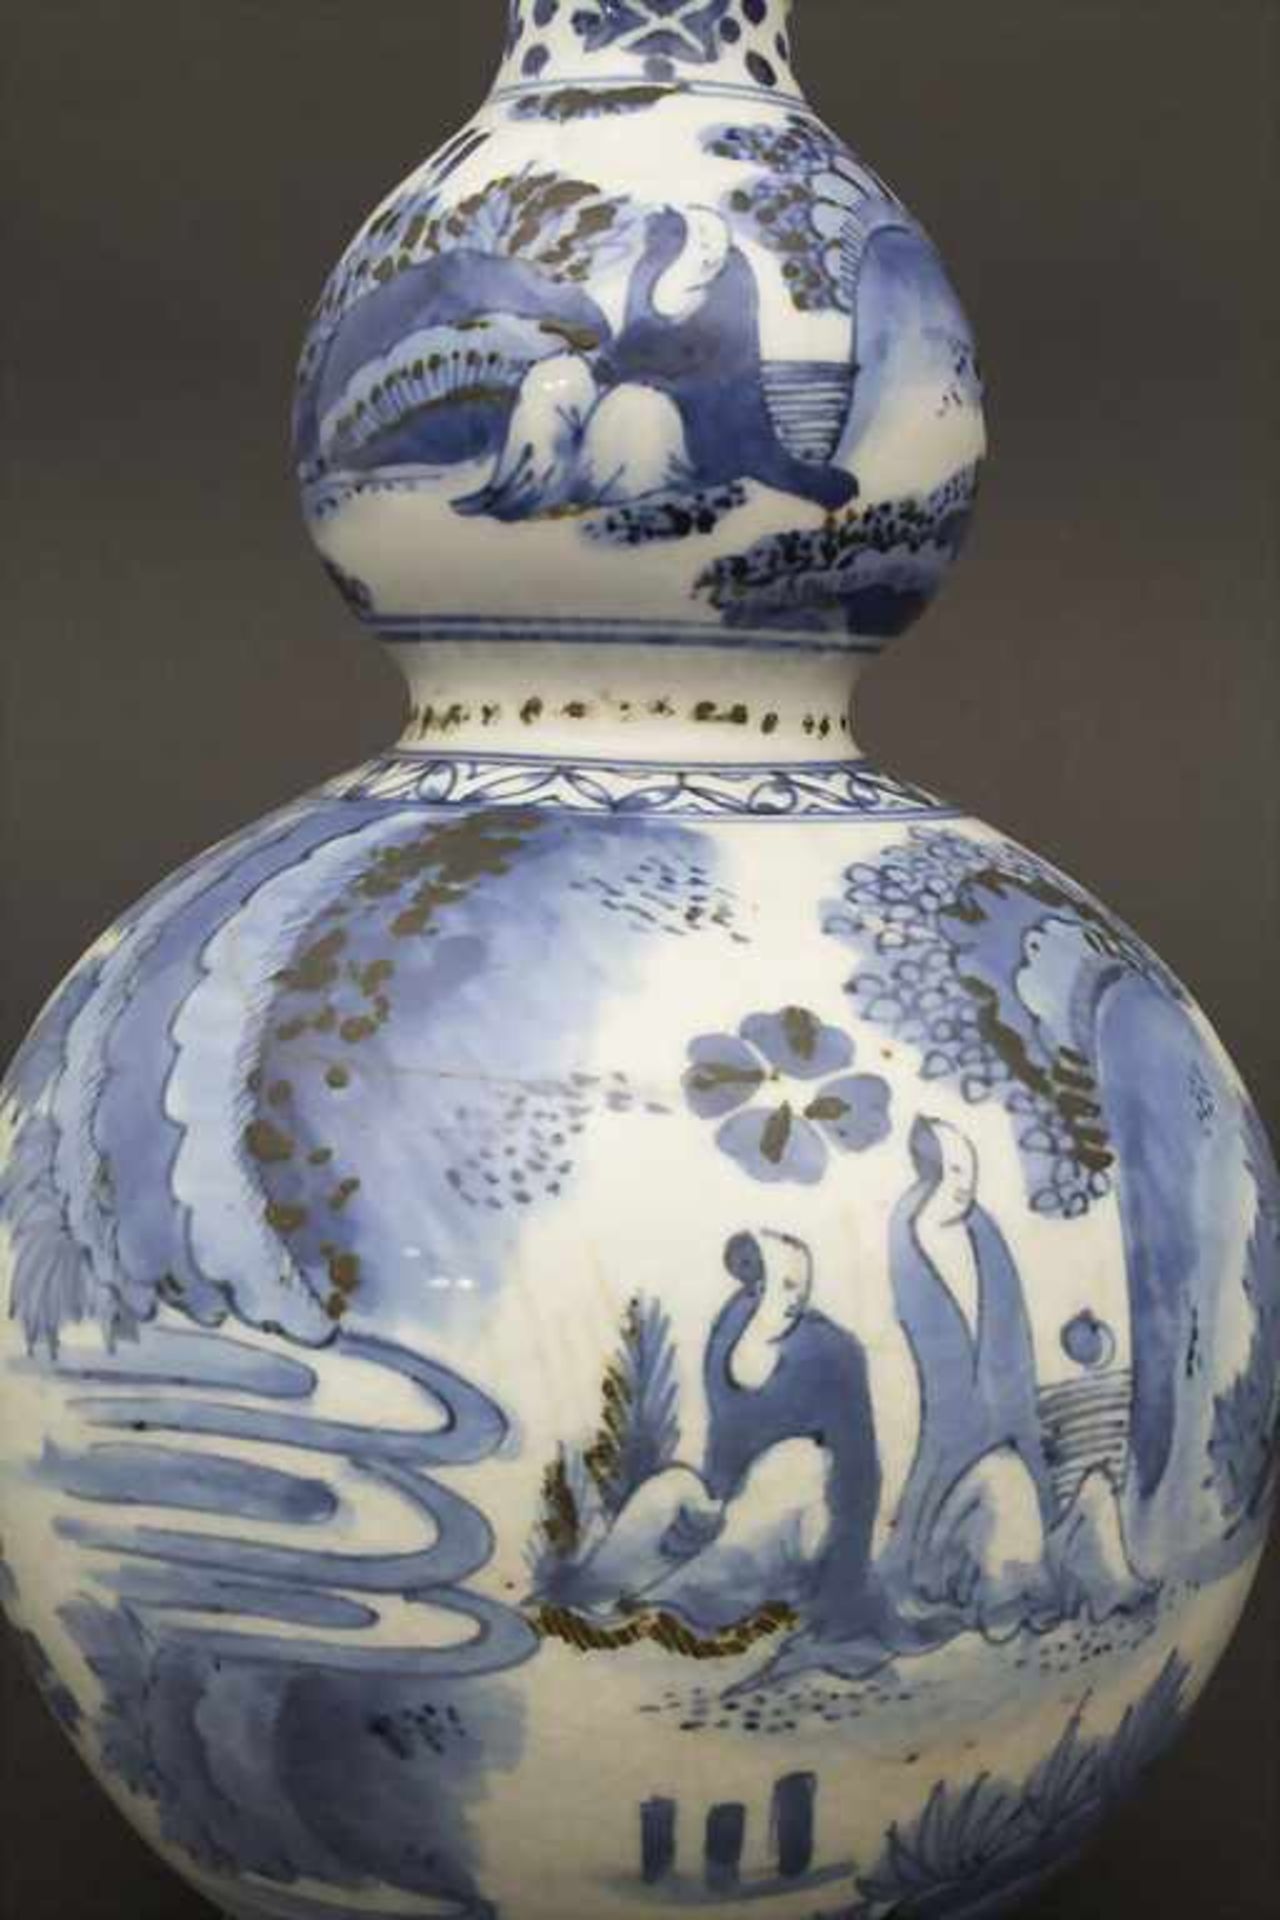 Ziervase / A vase, China, Ming/Qing- Dynastie - Image 6 of 7